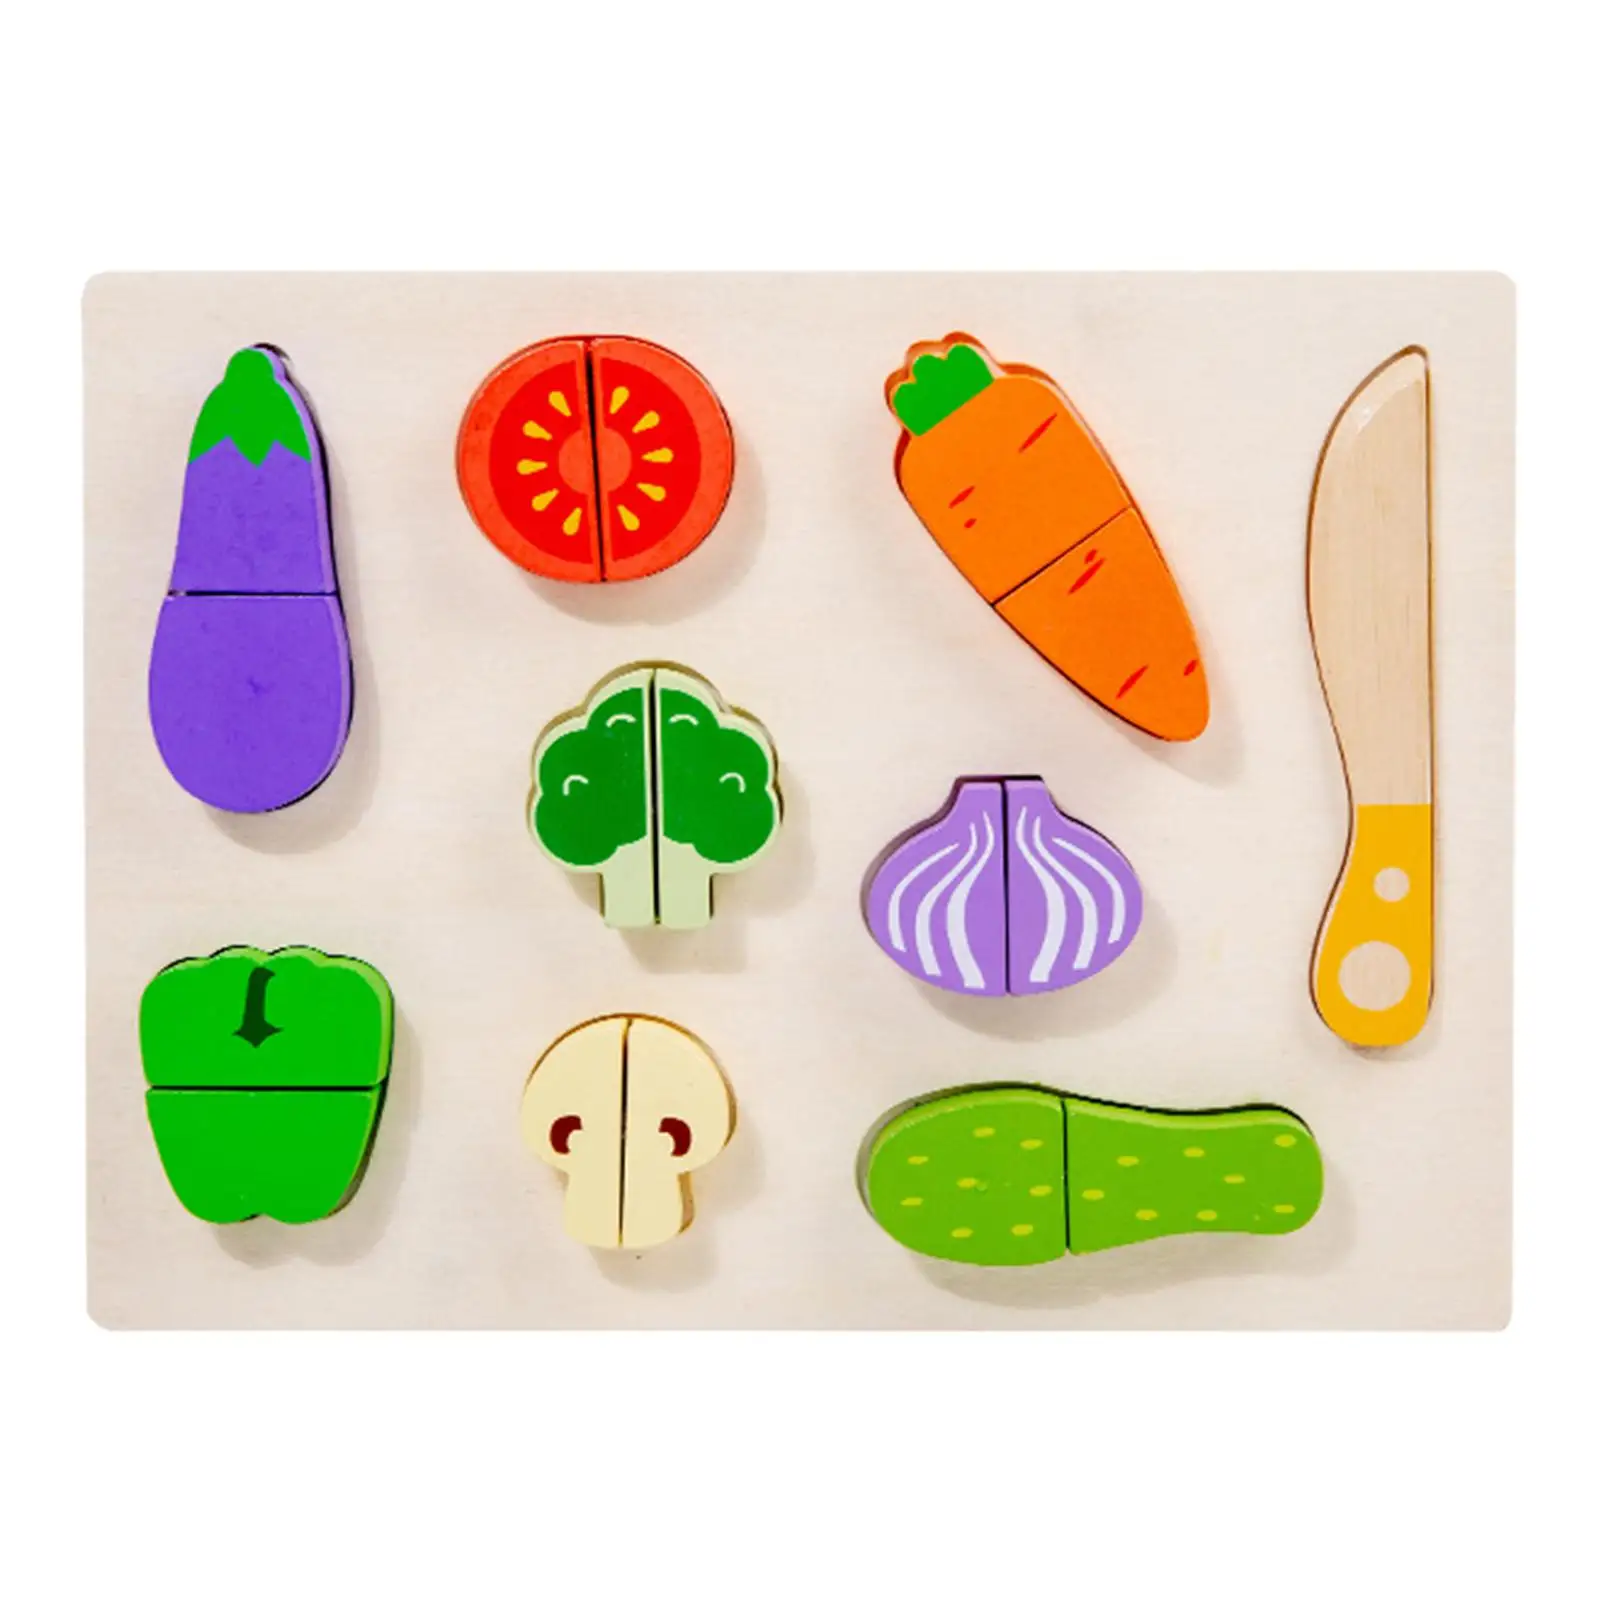 Cutting Vegetables Wooden Play Kitchen Toys Playset, Wood Puzzle Cutting Food Toy Vegetable Puzzle for Kids, Girls, Boys Gift